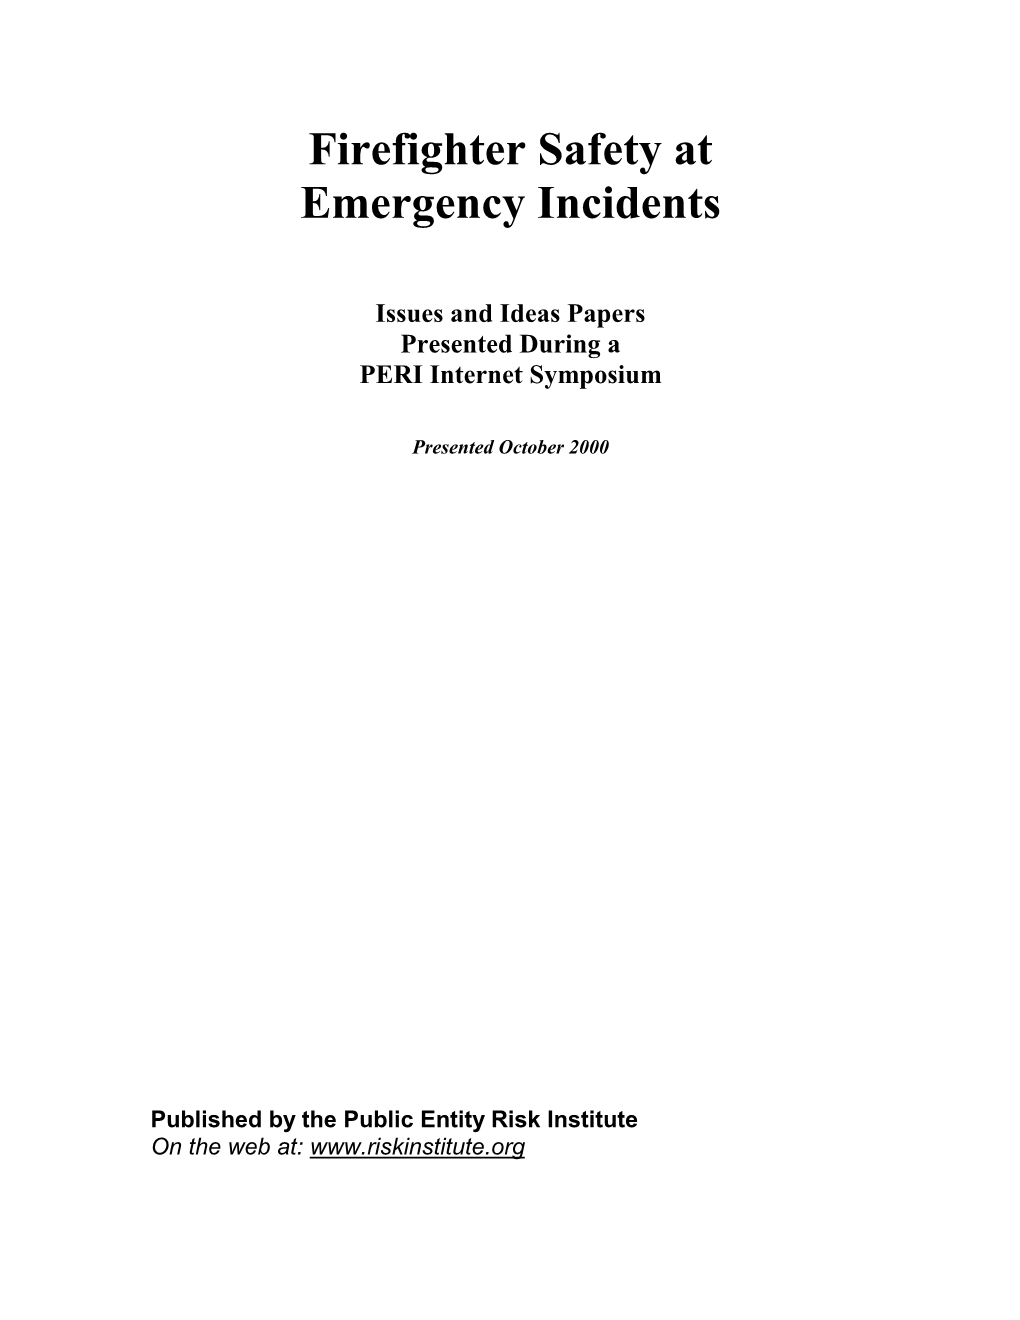 Firefighter Safety at Emergency Incidents Symposium Was Presented in October 2000